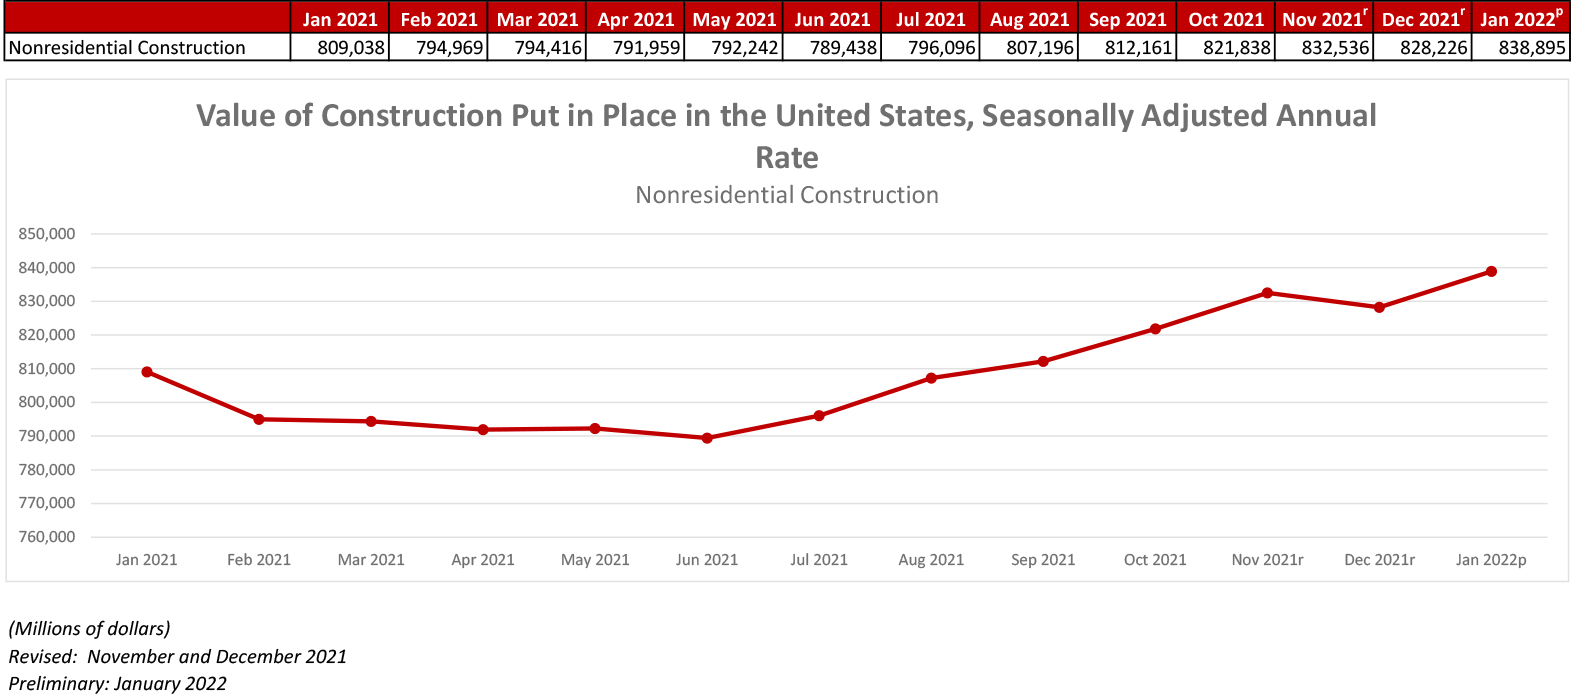 Nonresidential Construction Spending Up 1.3% in January